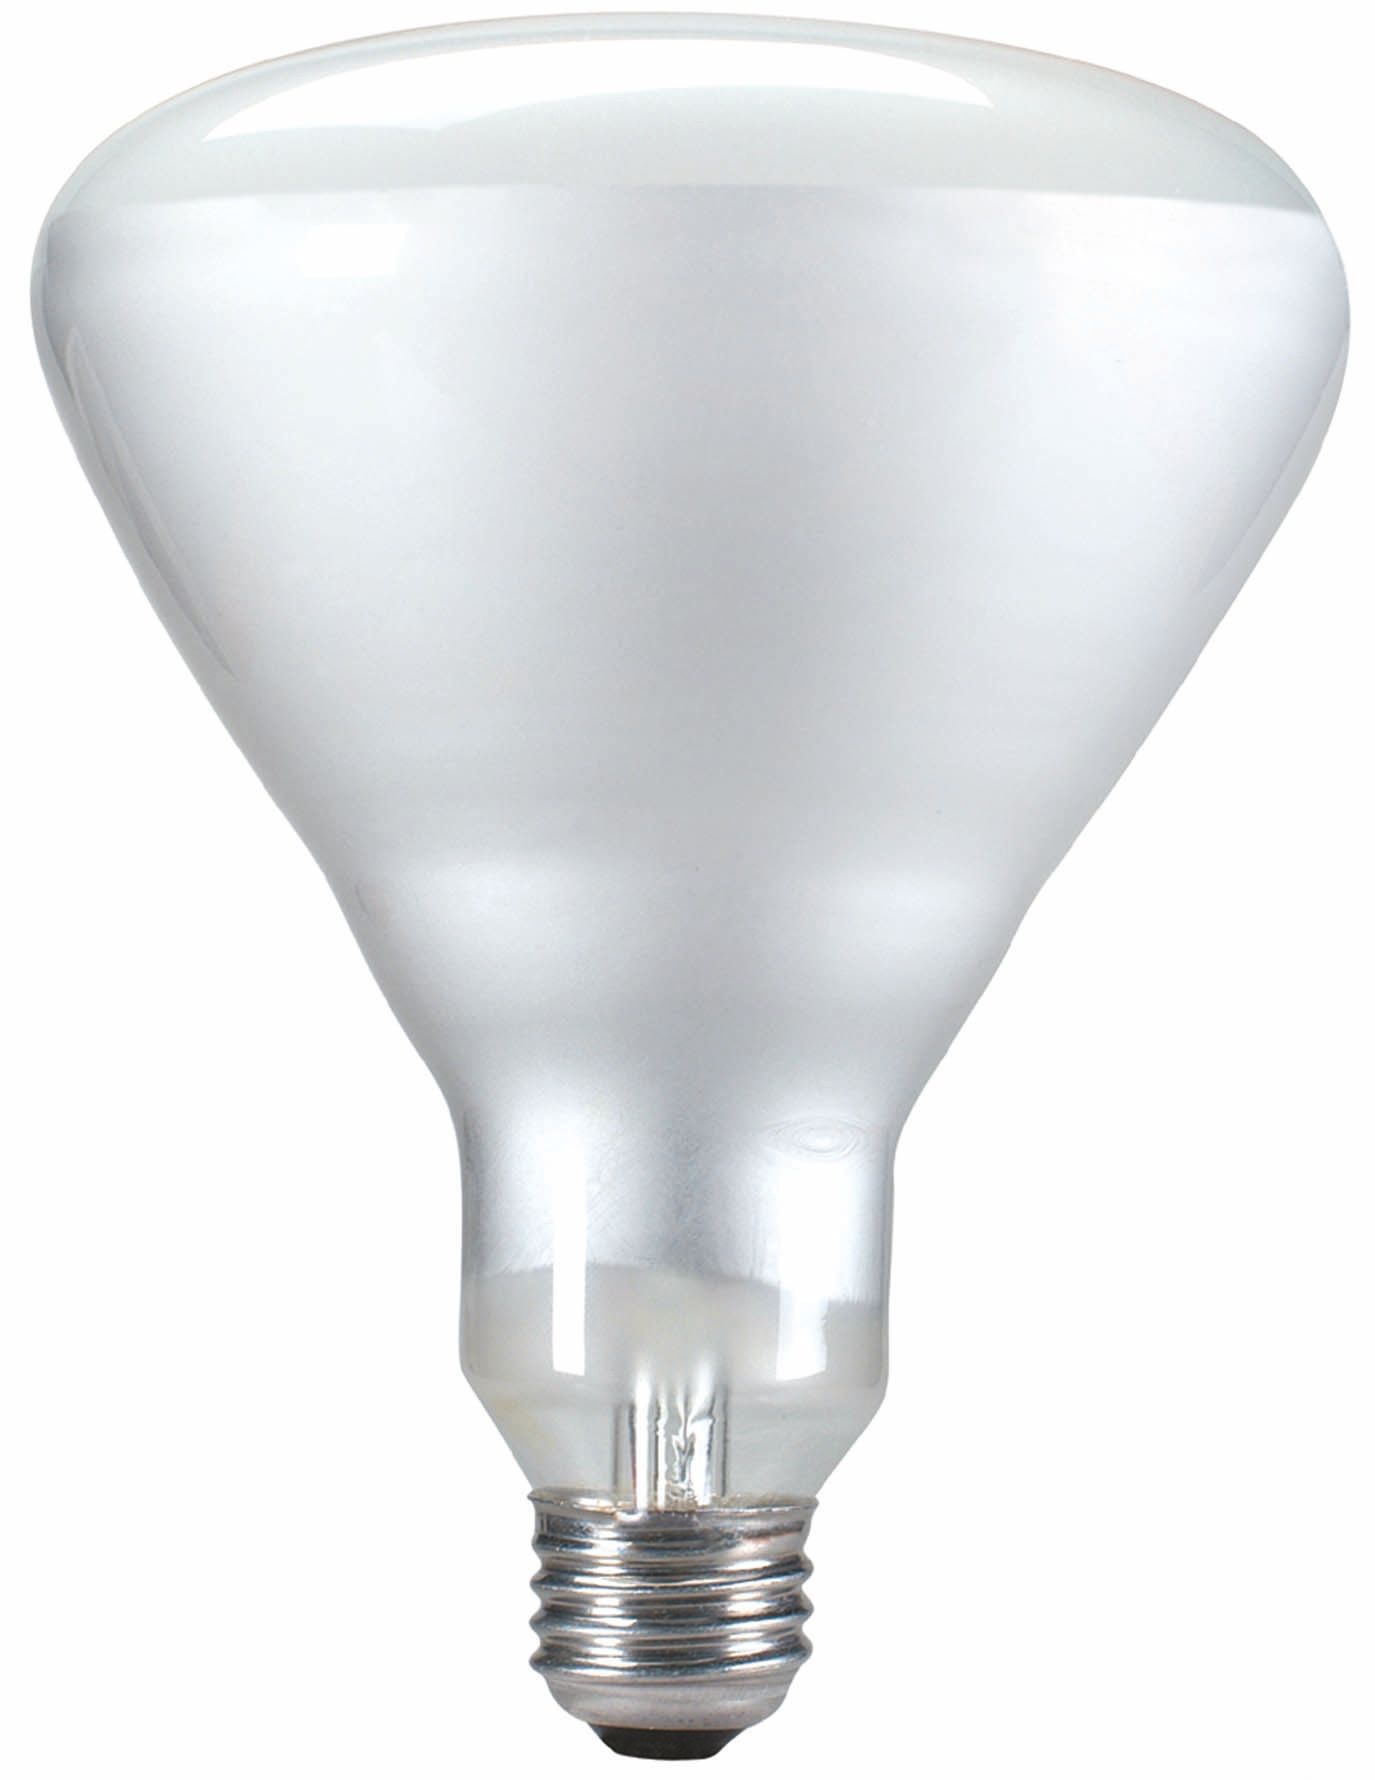 140087 Incandescent Reflector Flood Lamp Philips Lighting;Signify Lamps